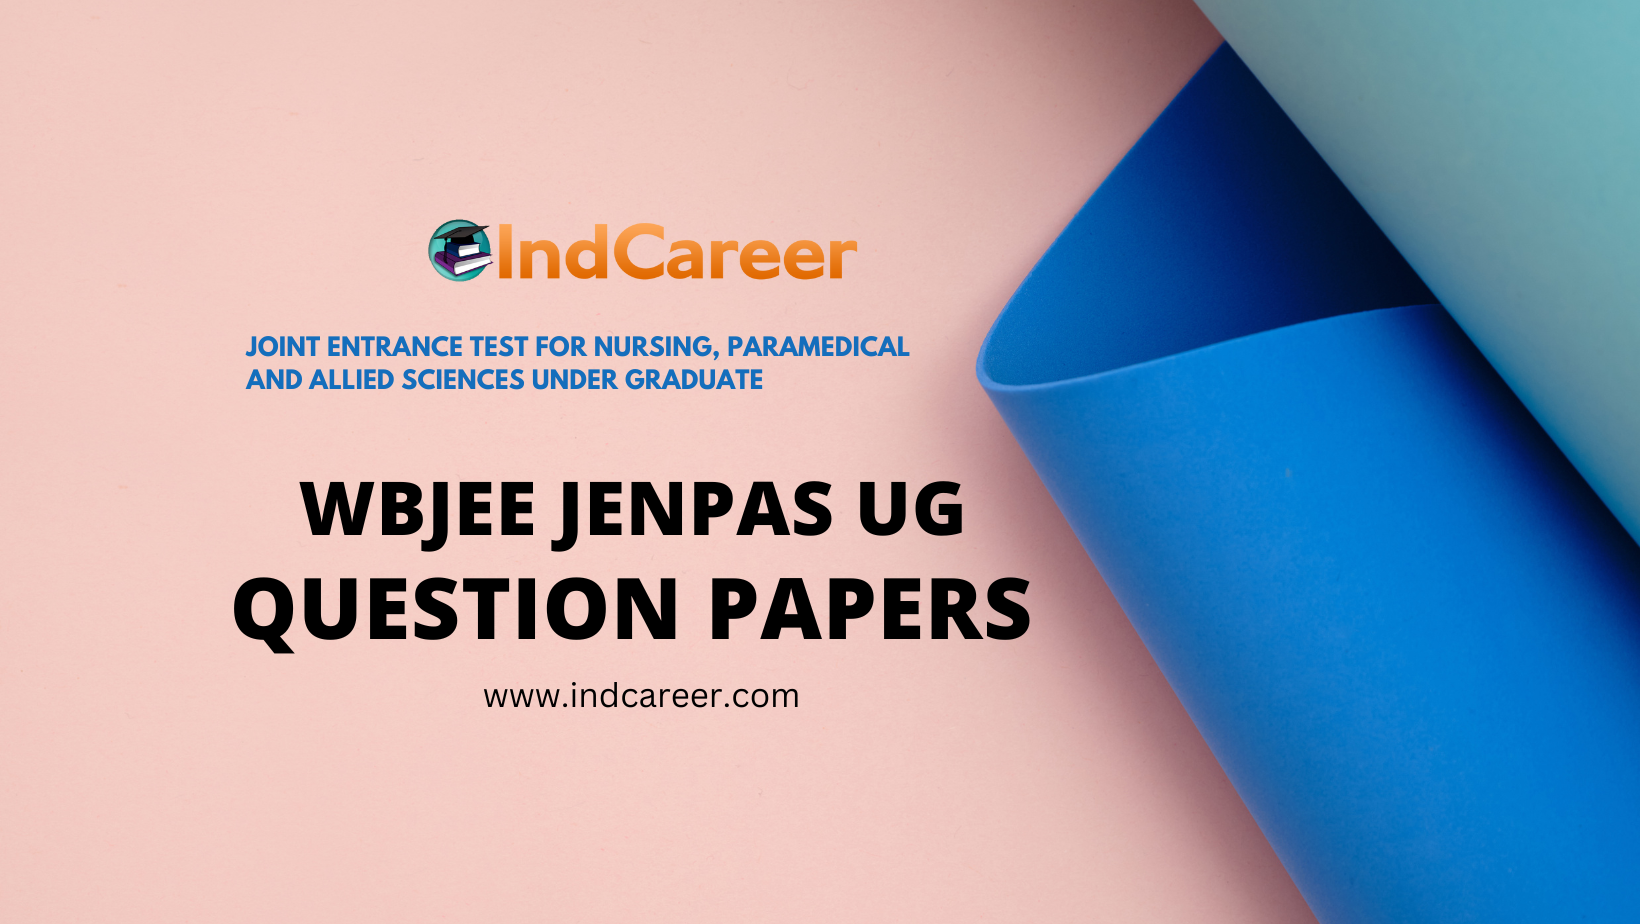 WBJEE JENPAS UG Question Papers